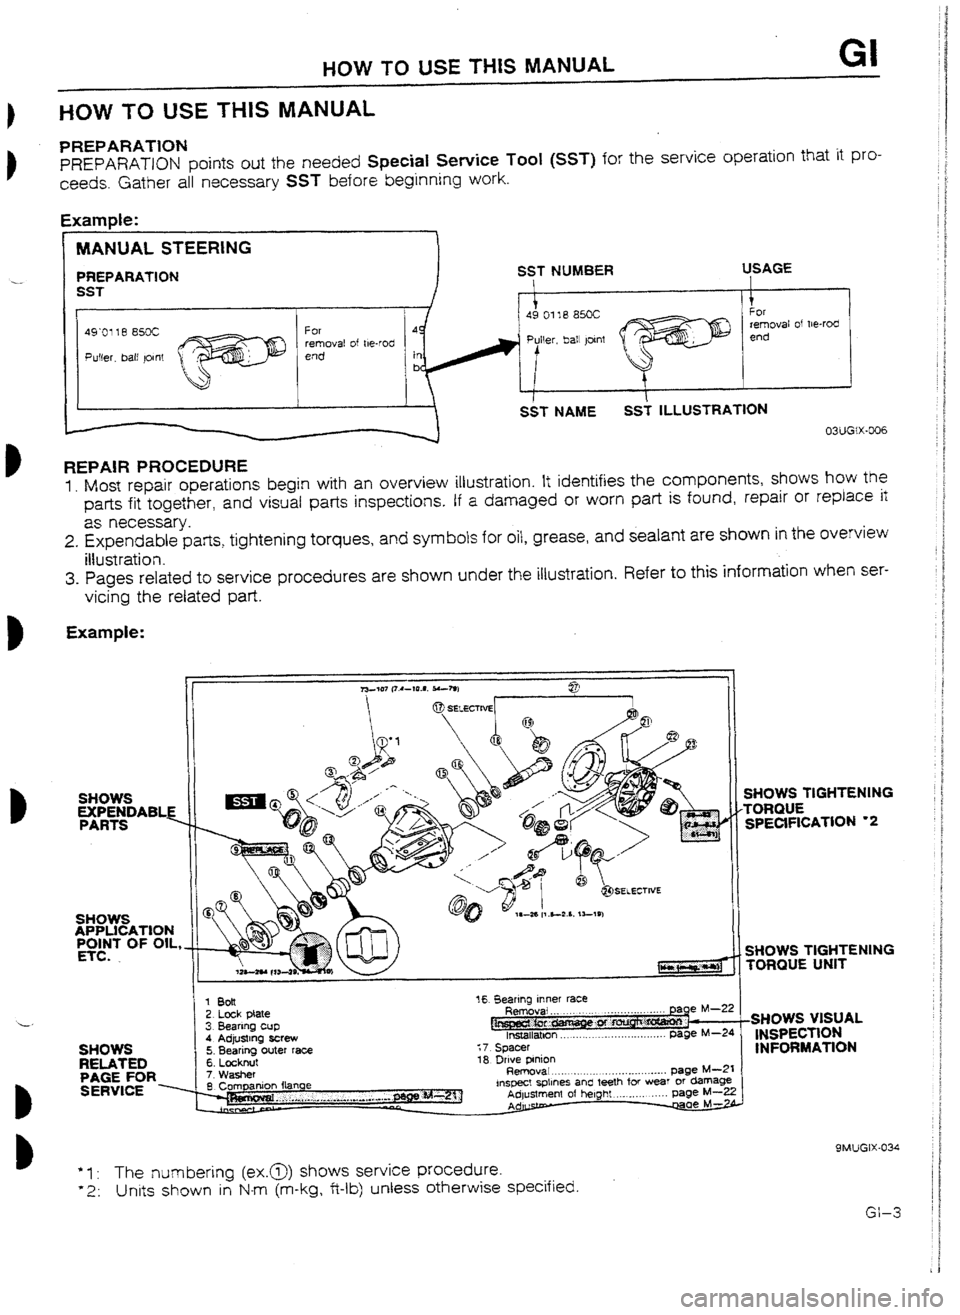 MAZDA 232 1990  Workshop Manual Suplement HOW TO USE TtiIS MANUAL GI 
HOW TO USE THIS MANUAL 
PREPARATION 
PREPARATON points out the needed SpeciaI Service Tool (SST) for the service operation that it pro- 
ceeds. Gather all necessary SST bef